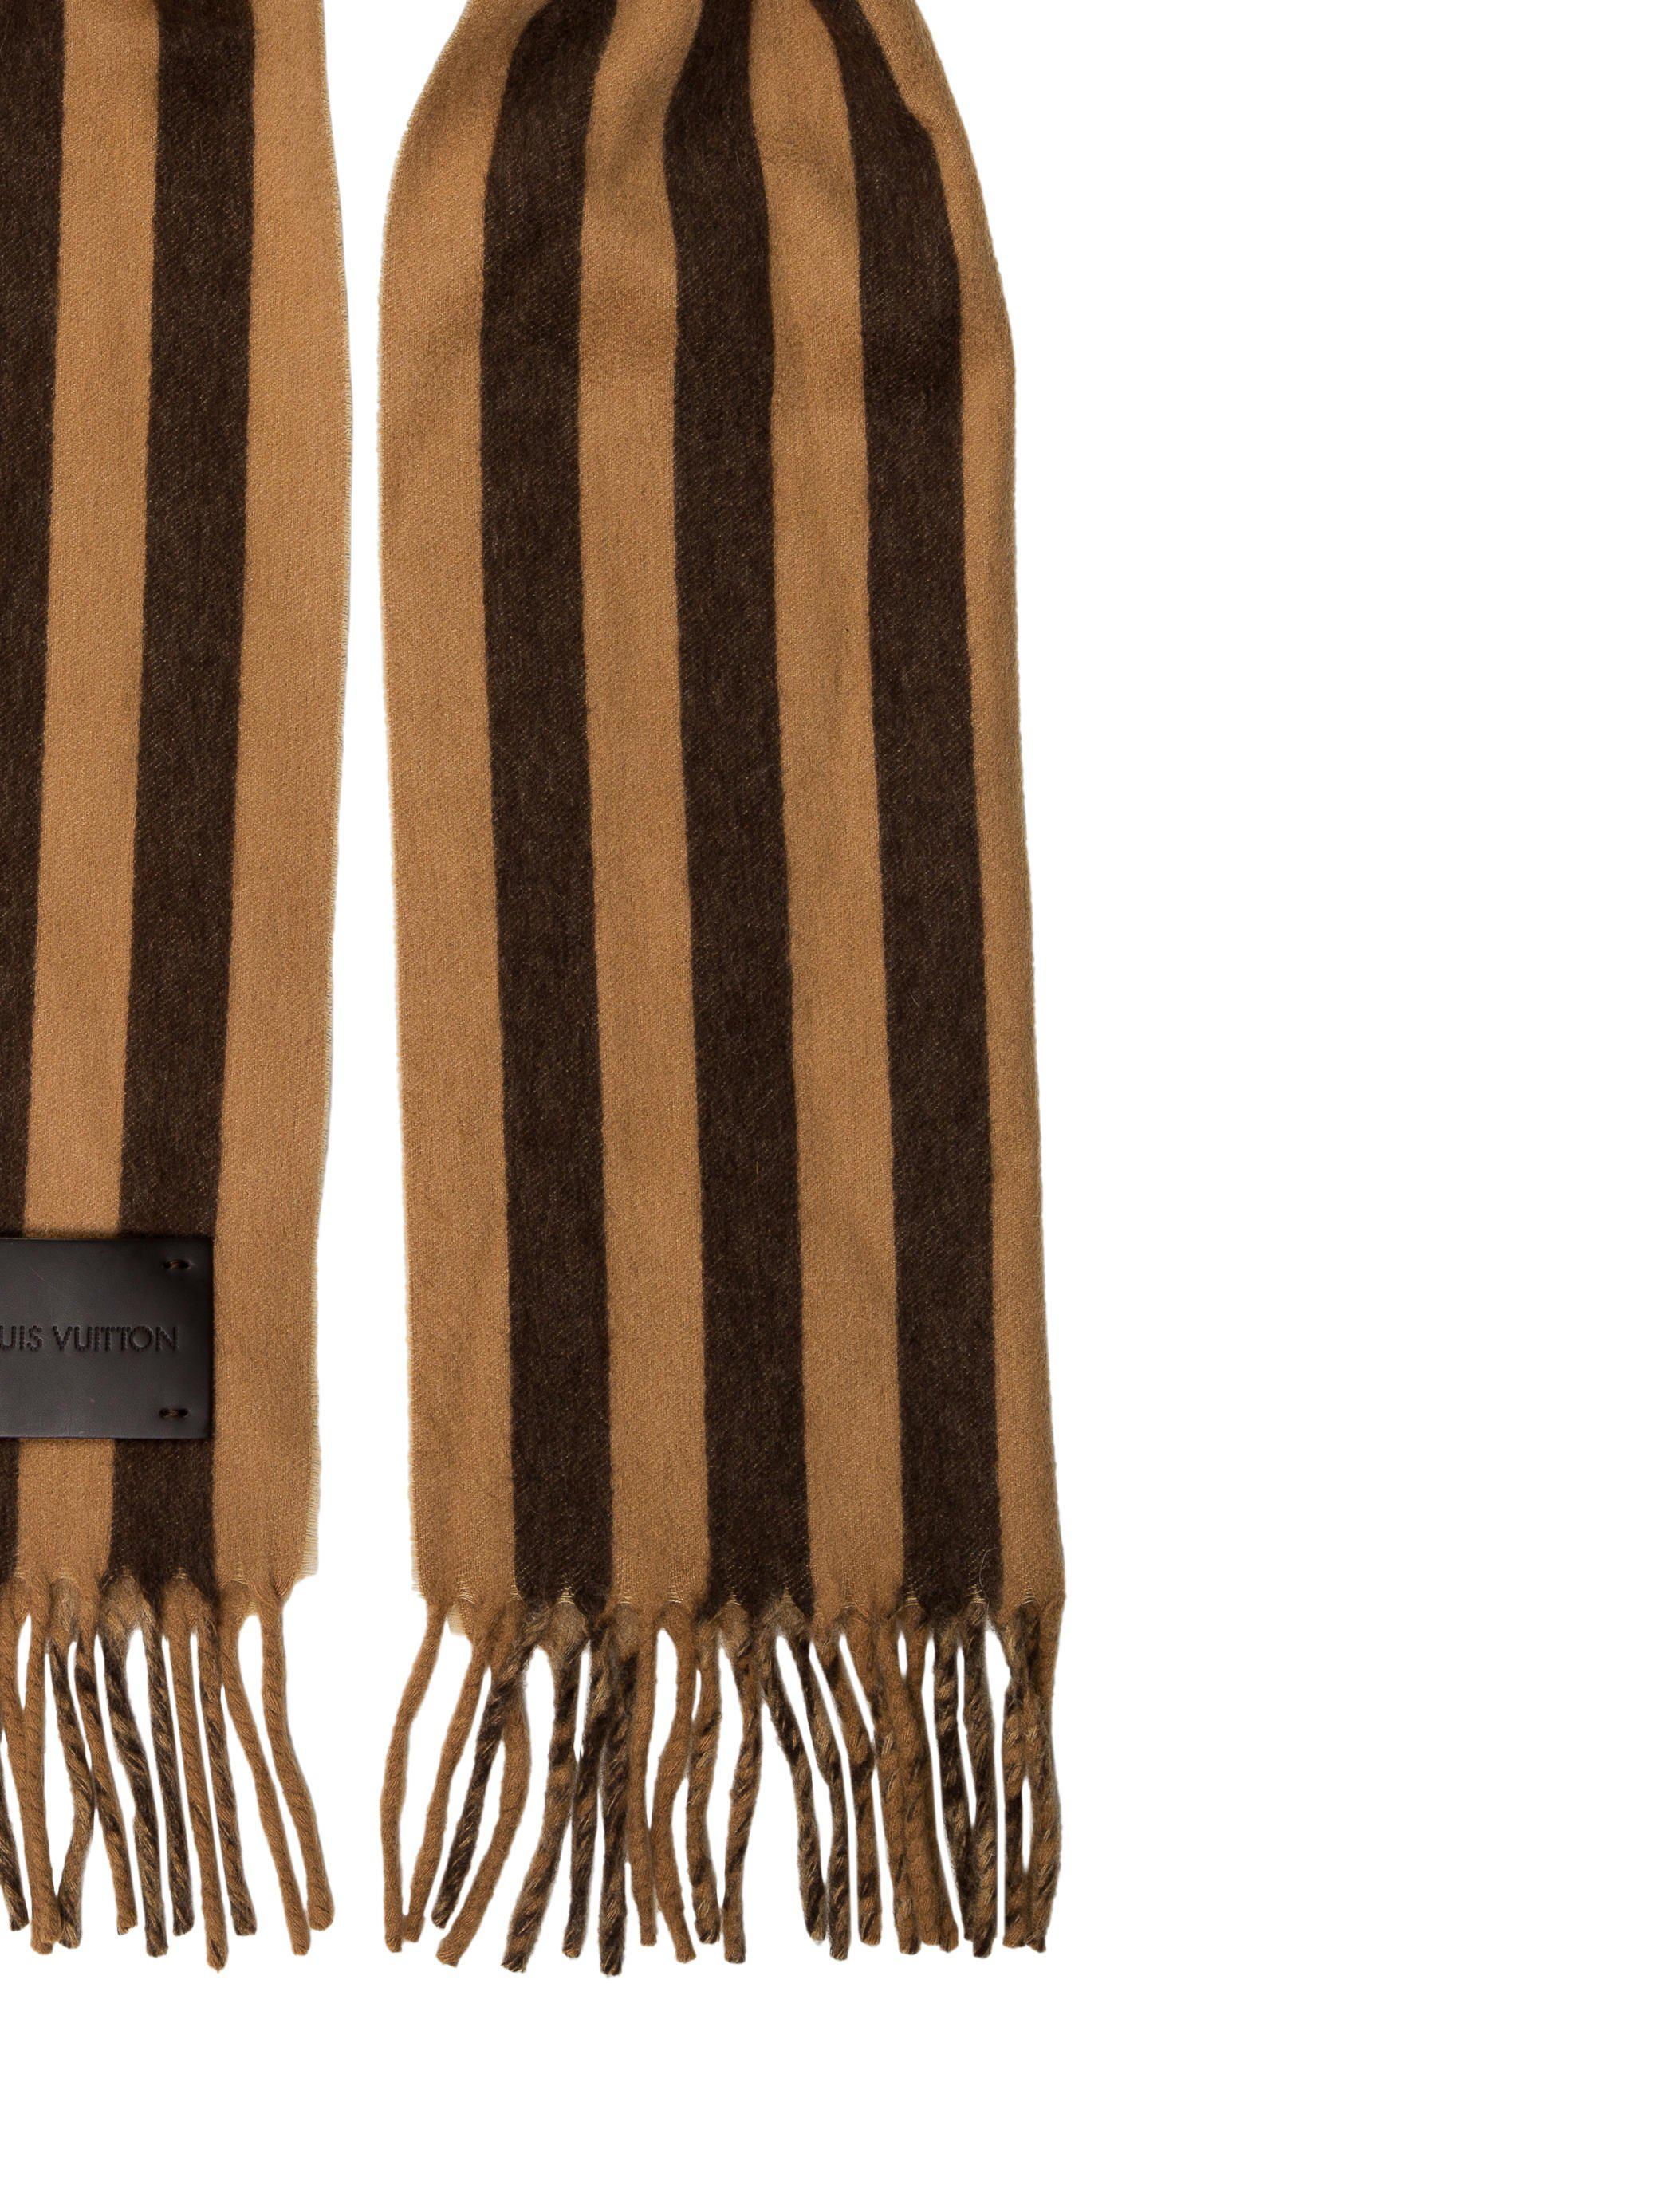 Lyst - Louis Vuitton Striped Cashmere Scarf Tan in Natural